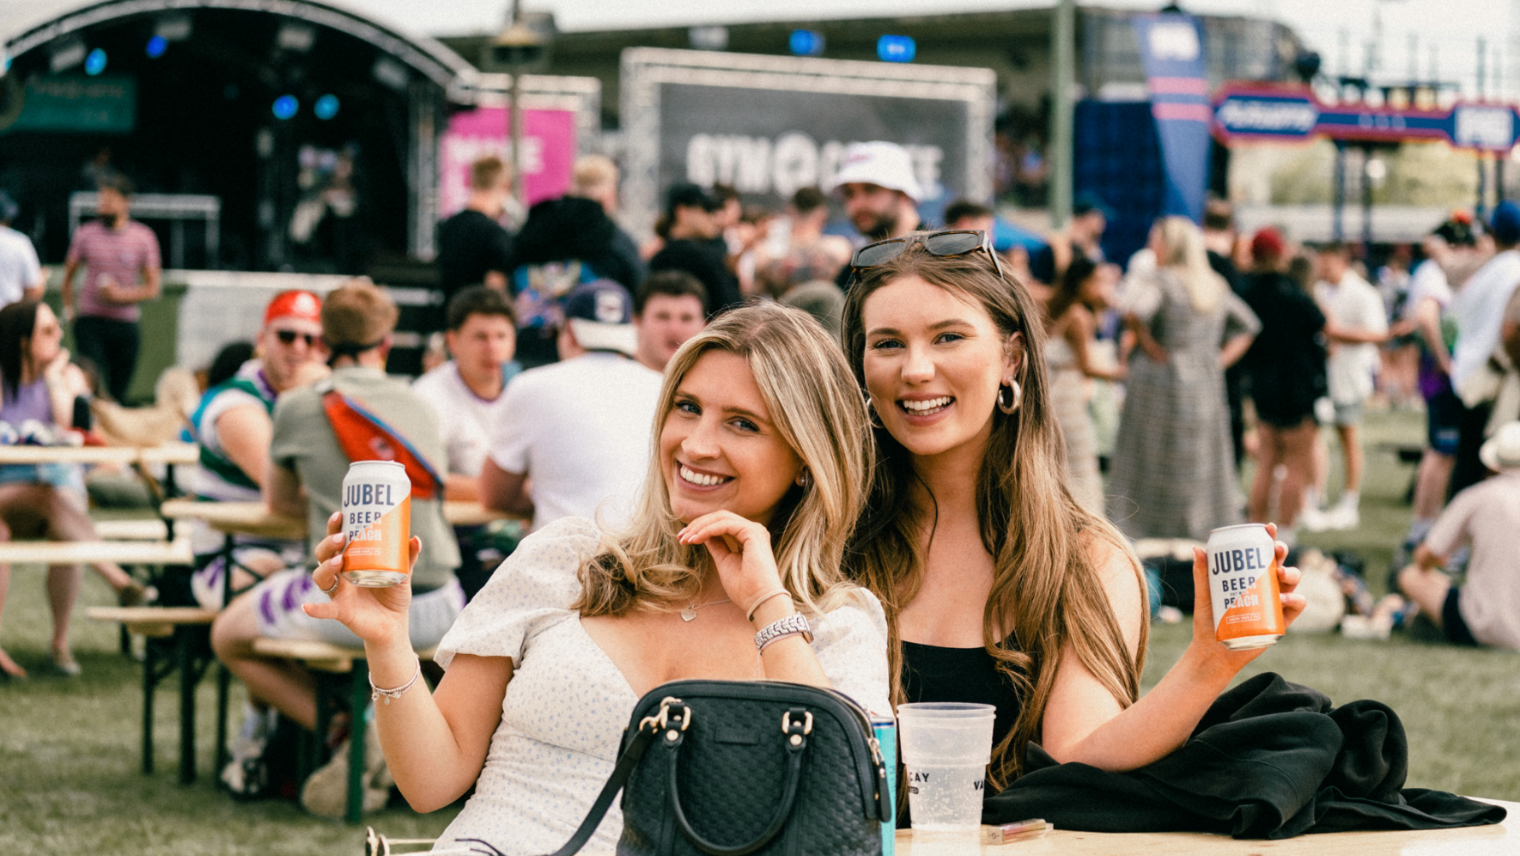 2 women with a drink in their hand at the Summer Social festival